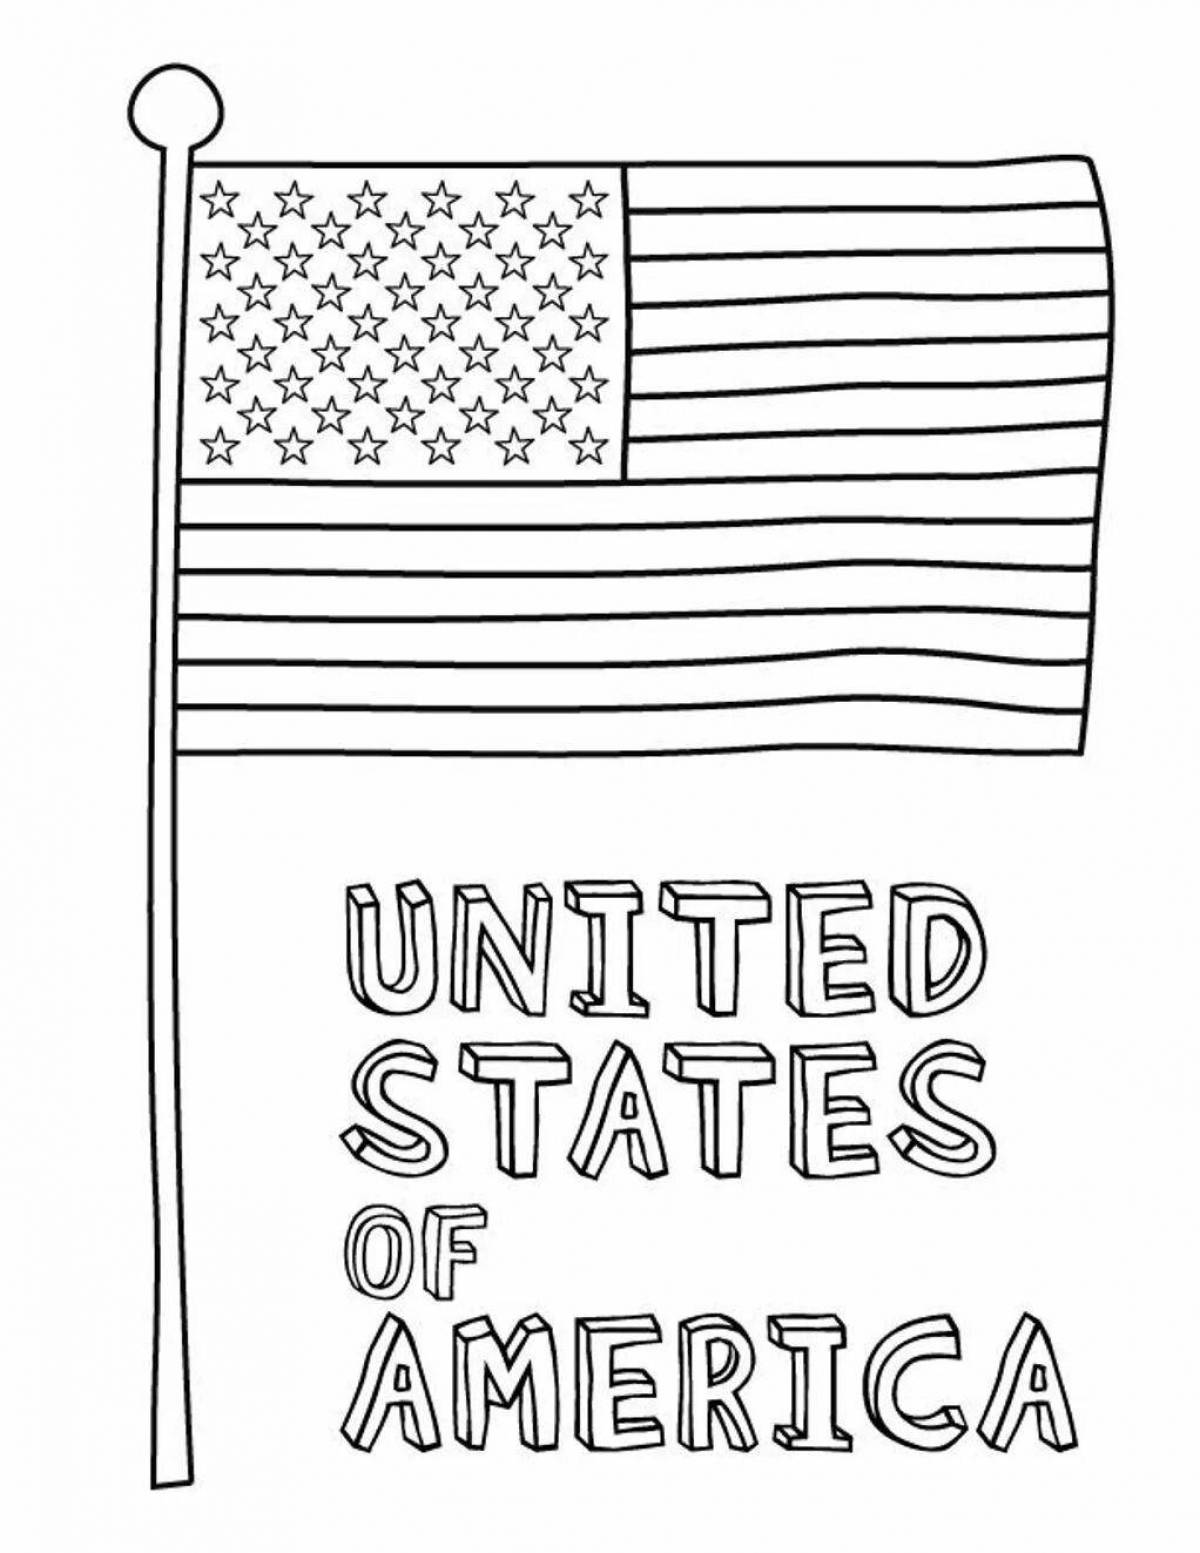 Coloring page gorgeous american flag